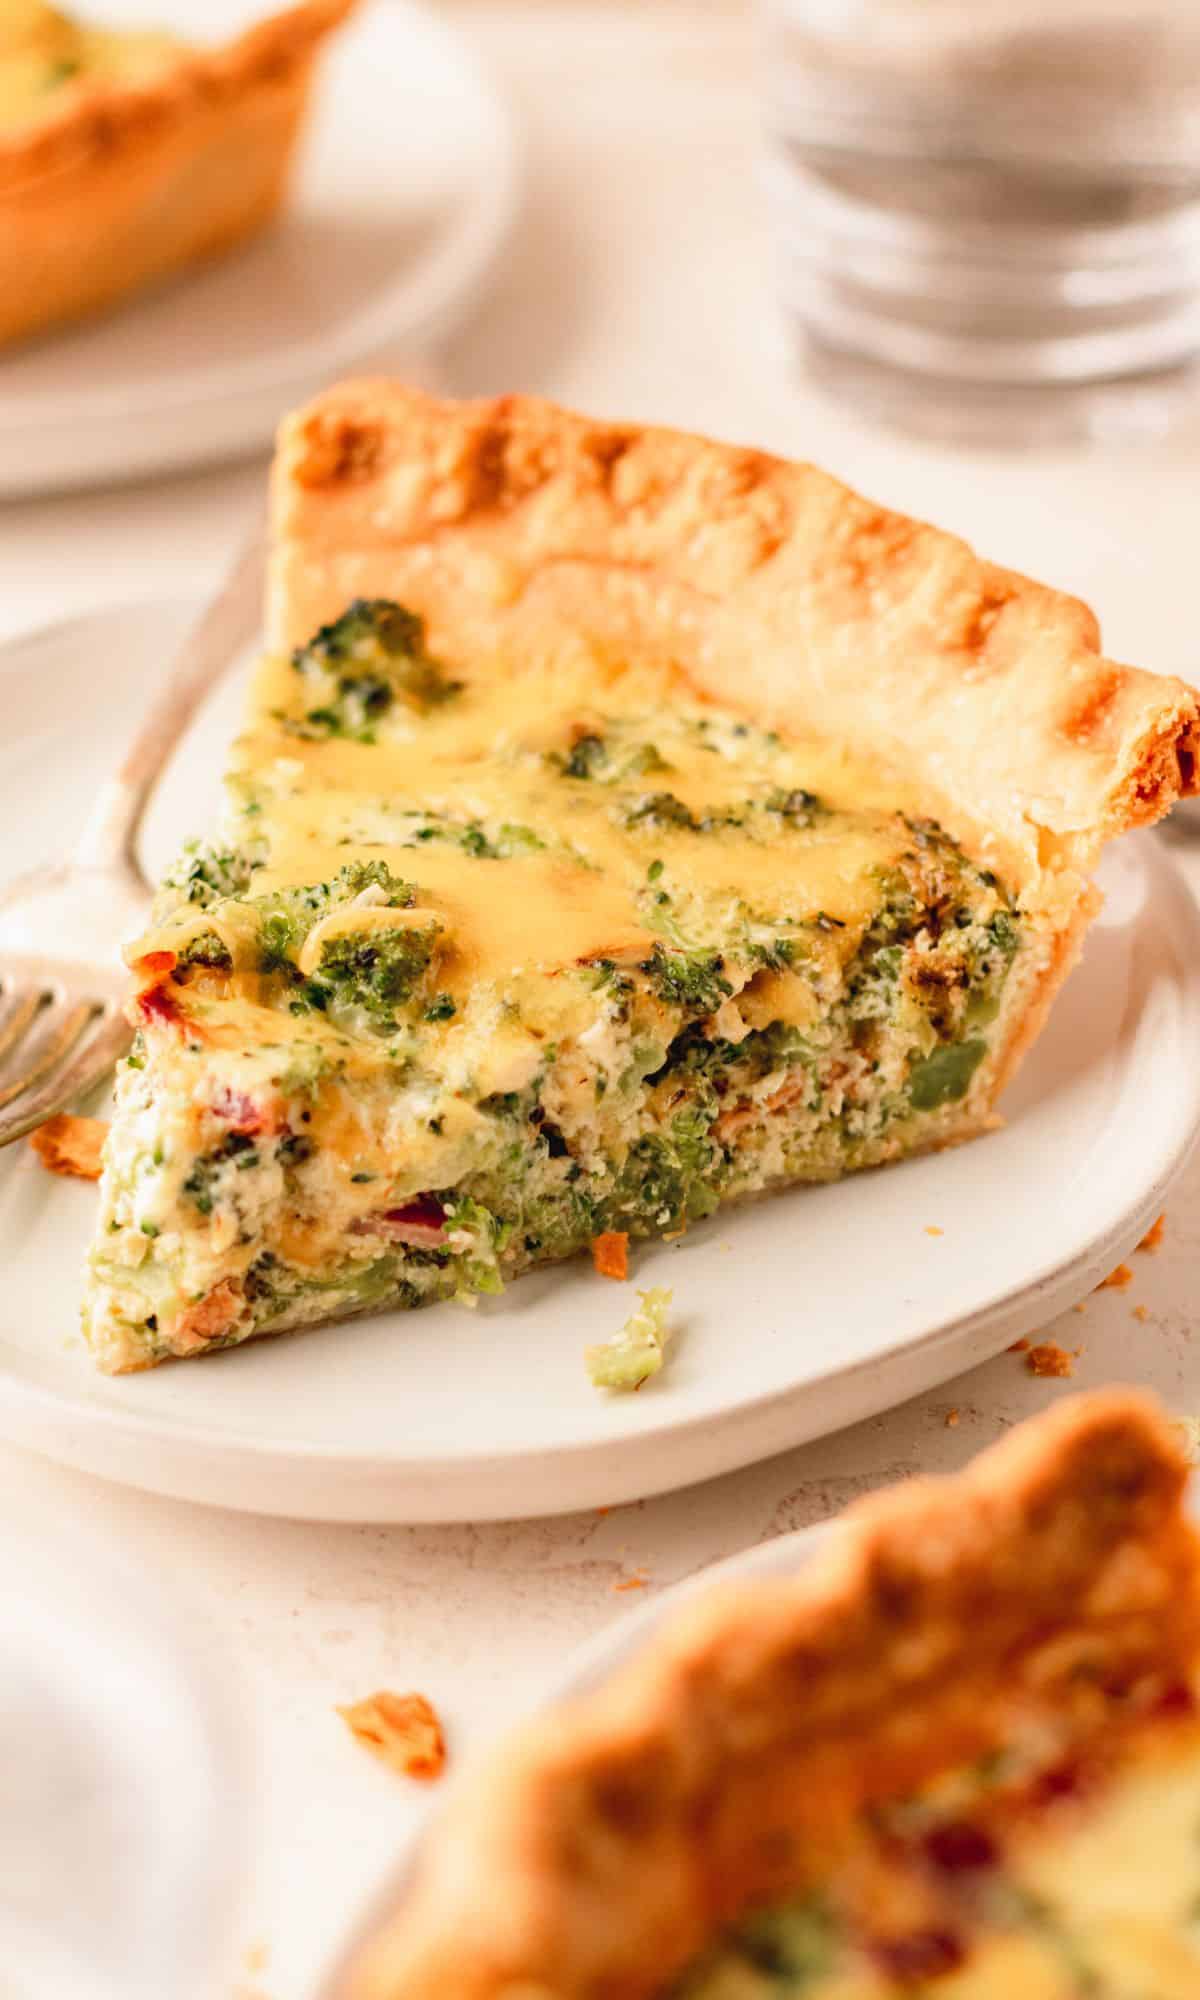 A slice of quiche on a white plate with a fork.